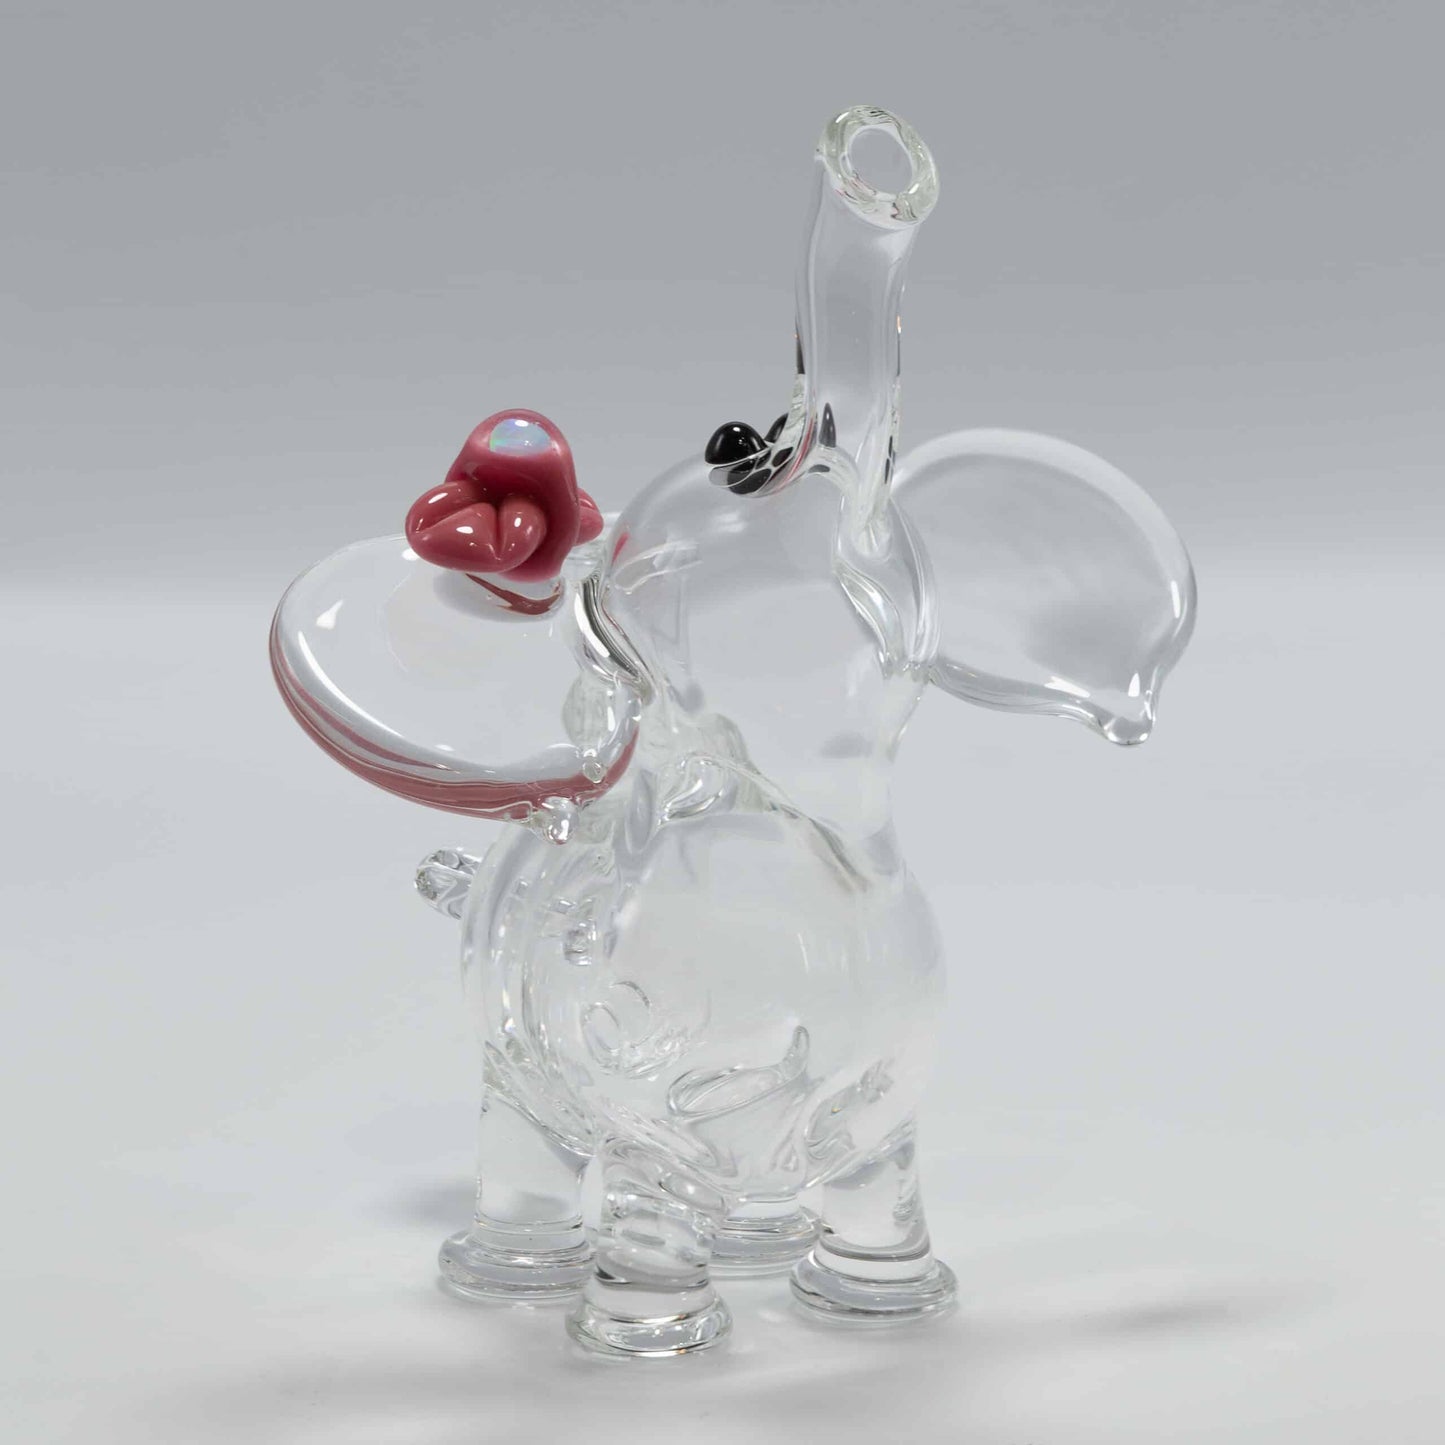 meticulously crafted design of the Clear Small Elephant Rig by Flame Princess Glass